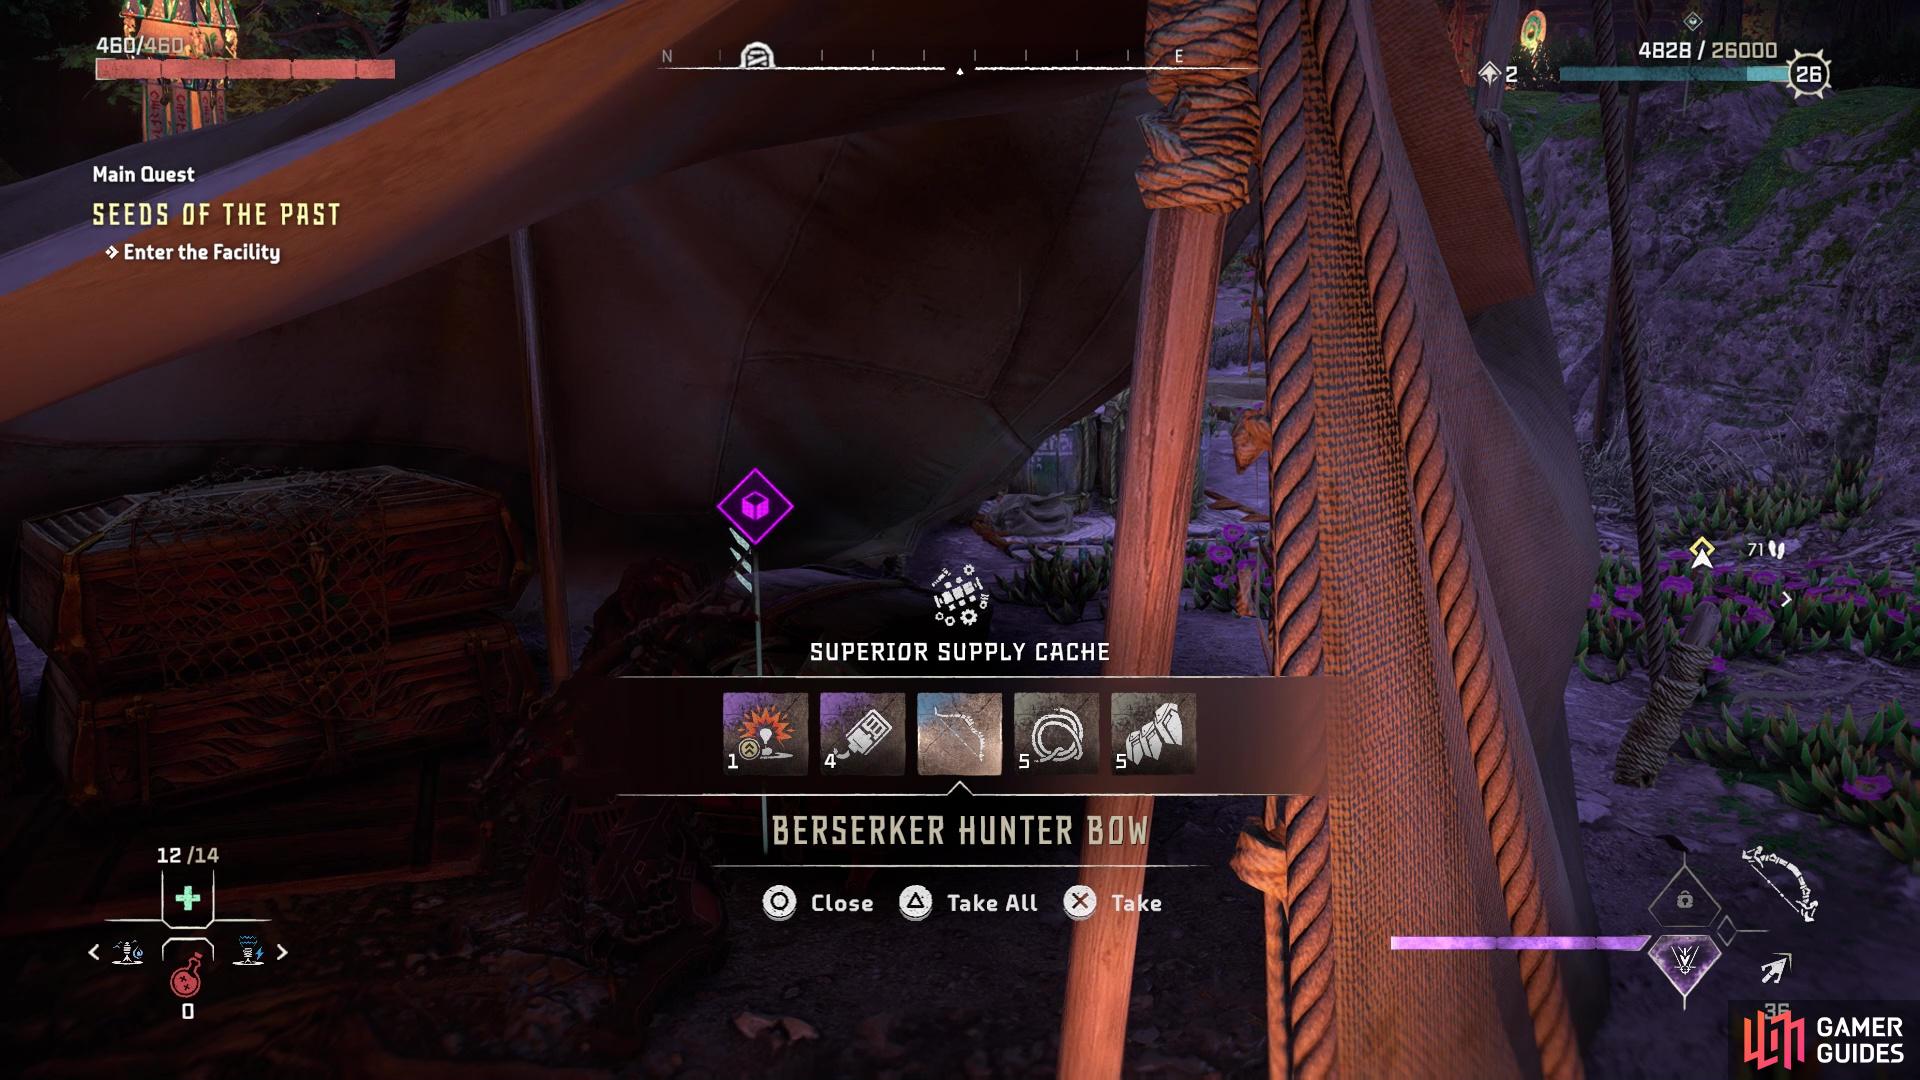 Don't forget to loot the Berserker Hunter Bow from the chest